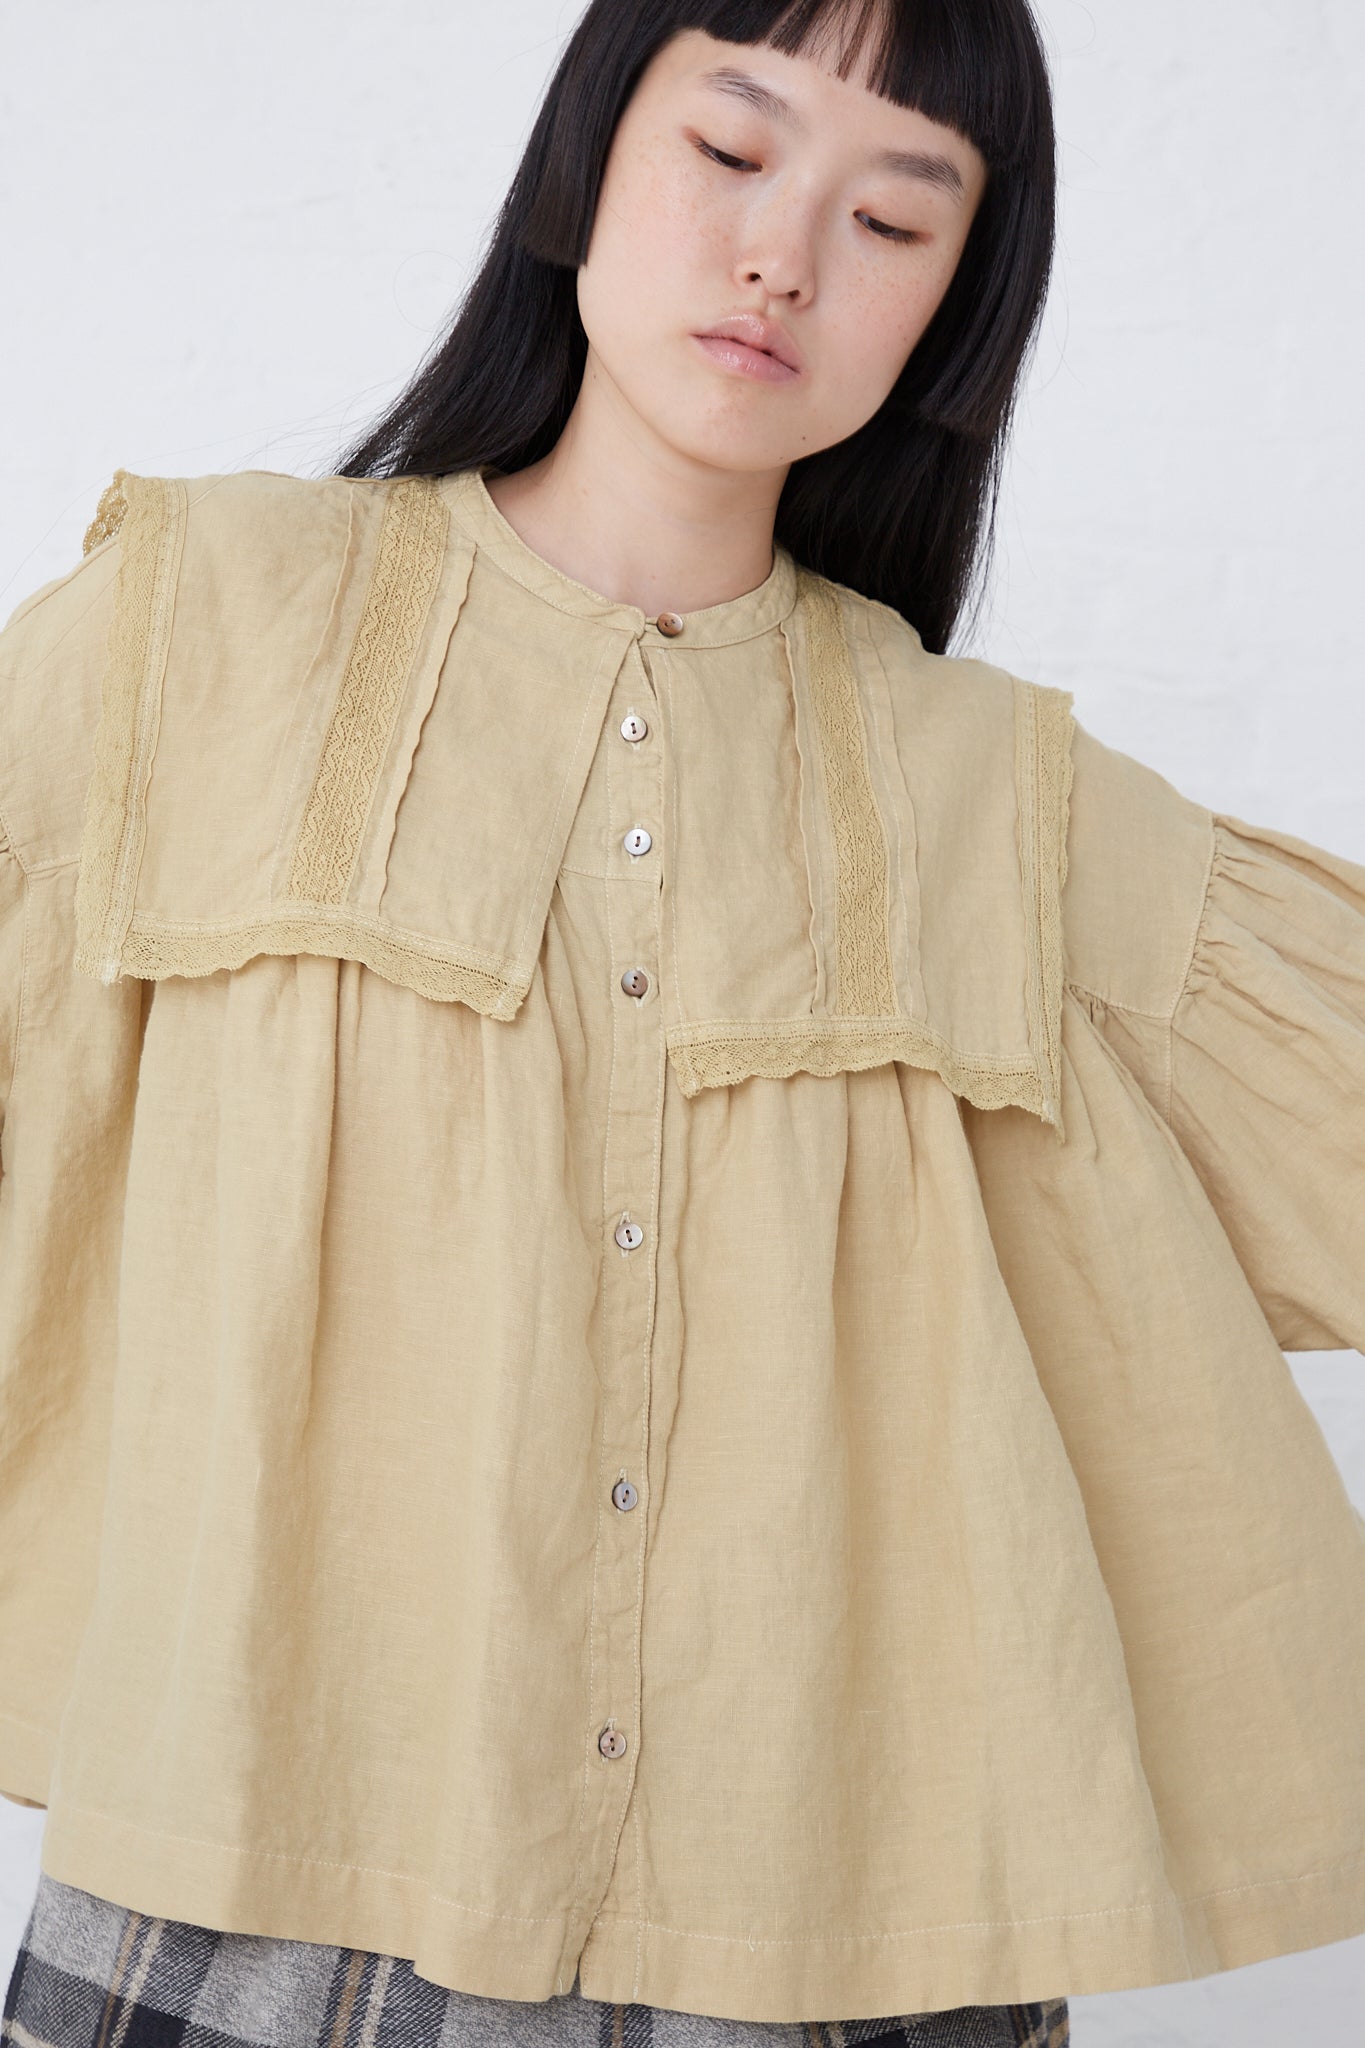 The model is wearing a Natural Dyed Linen Lace Blouse in Yellow from nest Robe with ruffles and a sailor collar.